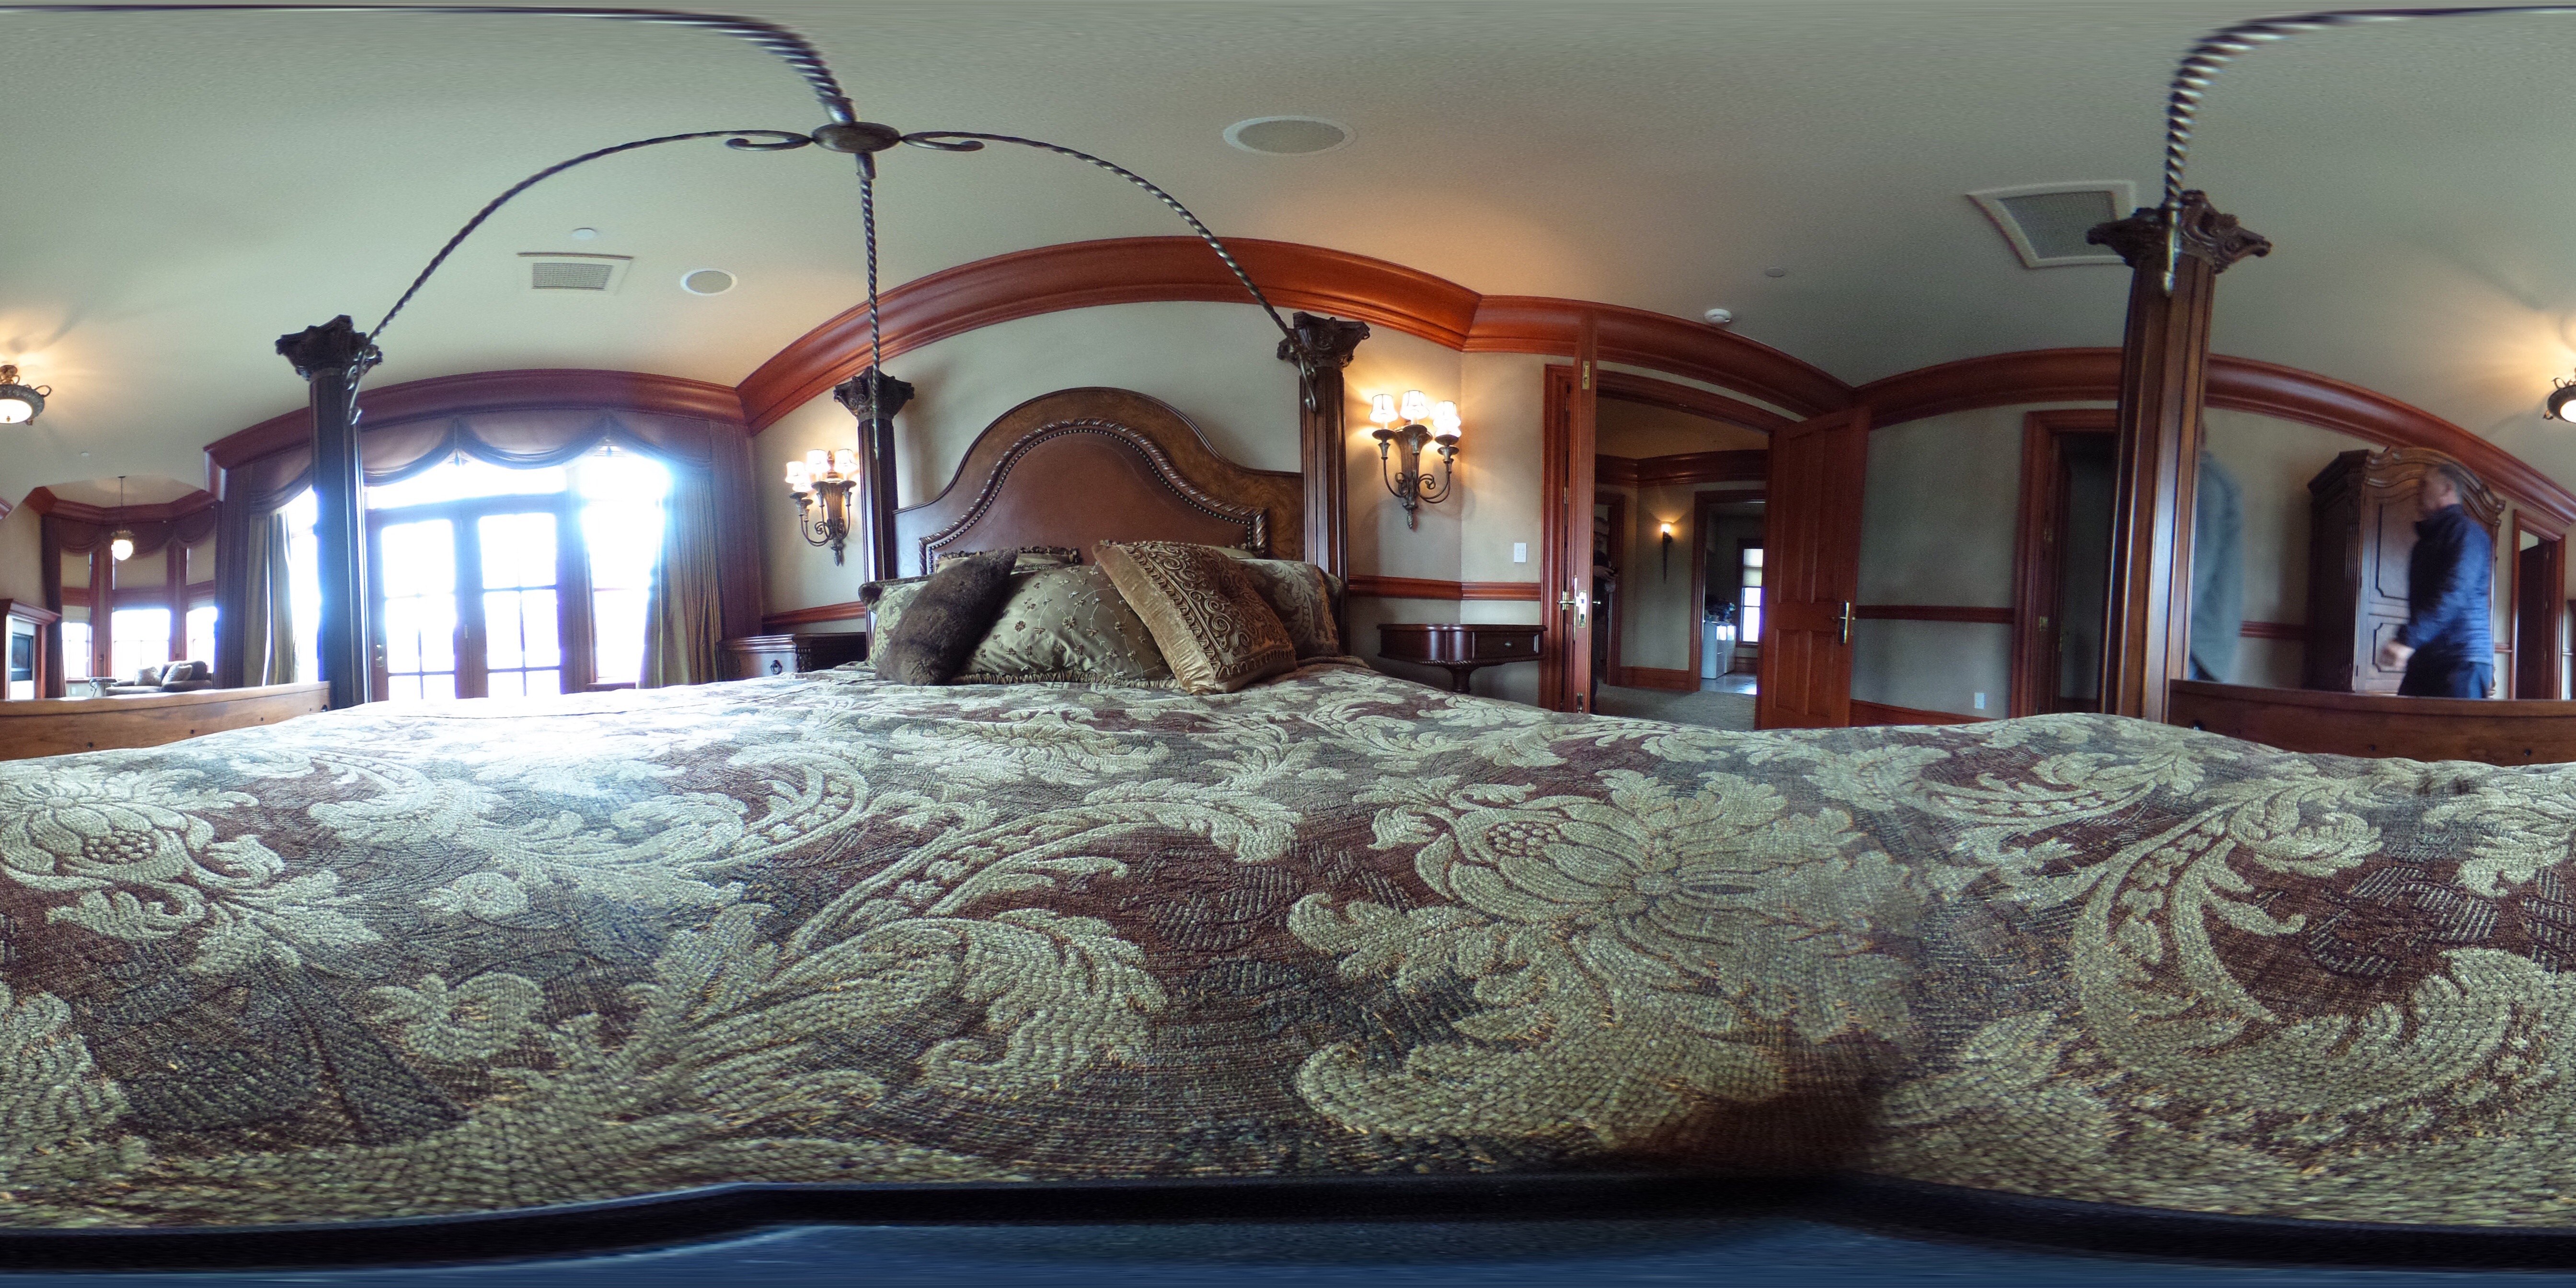 The "Amway House" in Post Falls - Bedroom